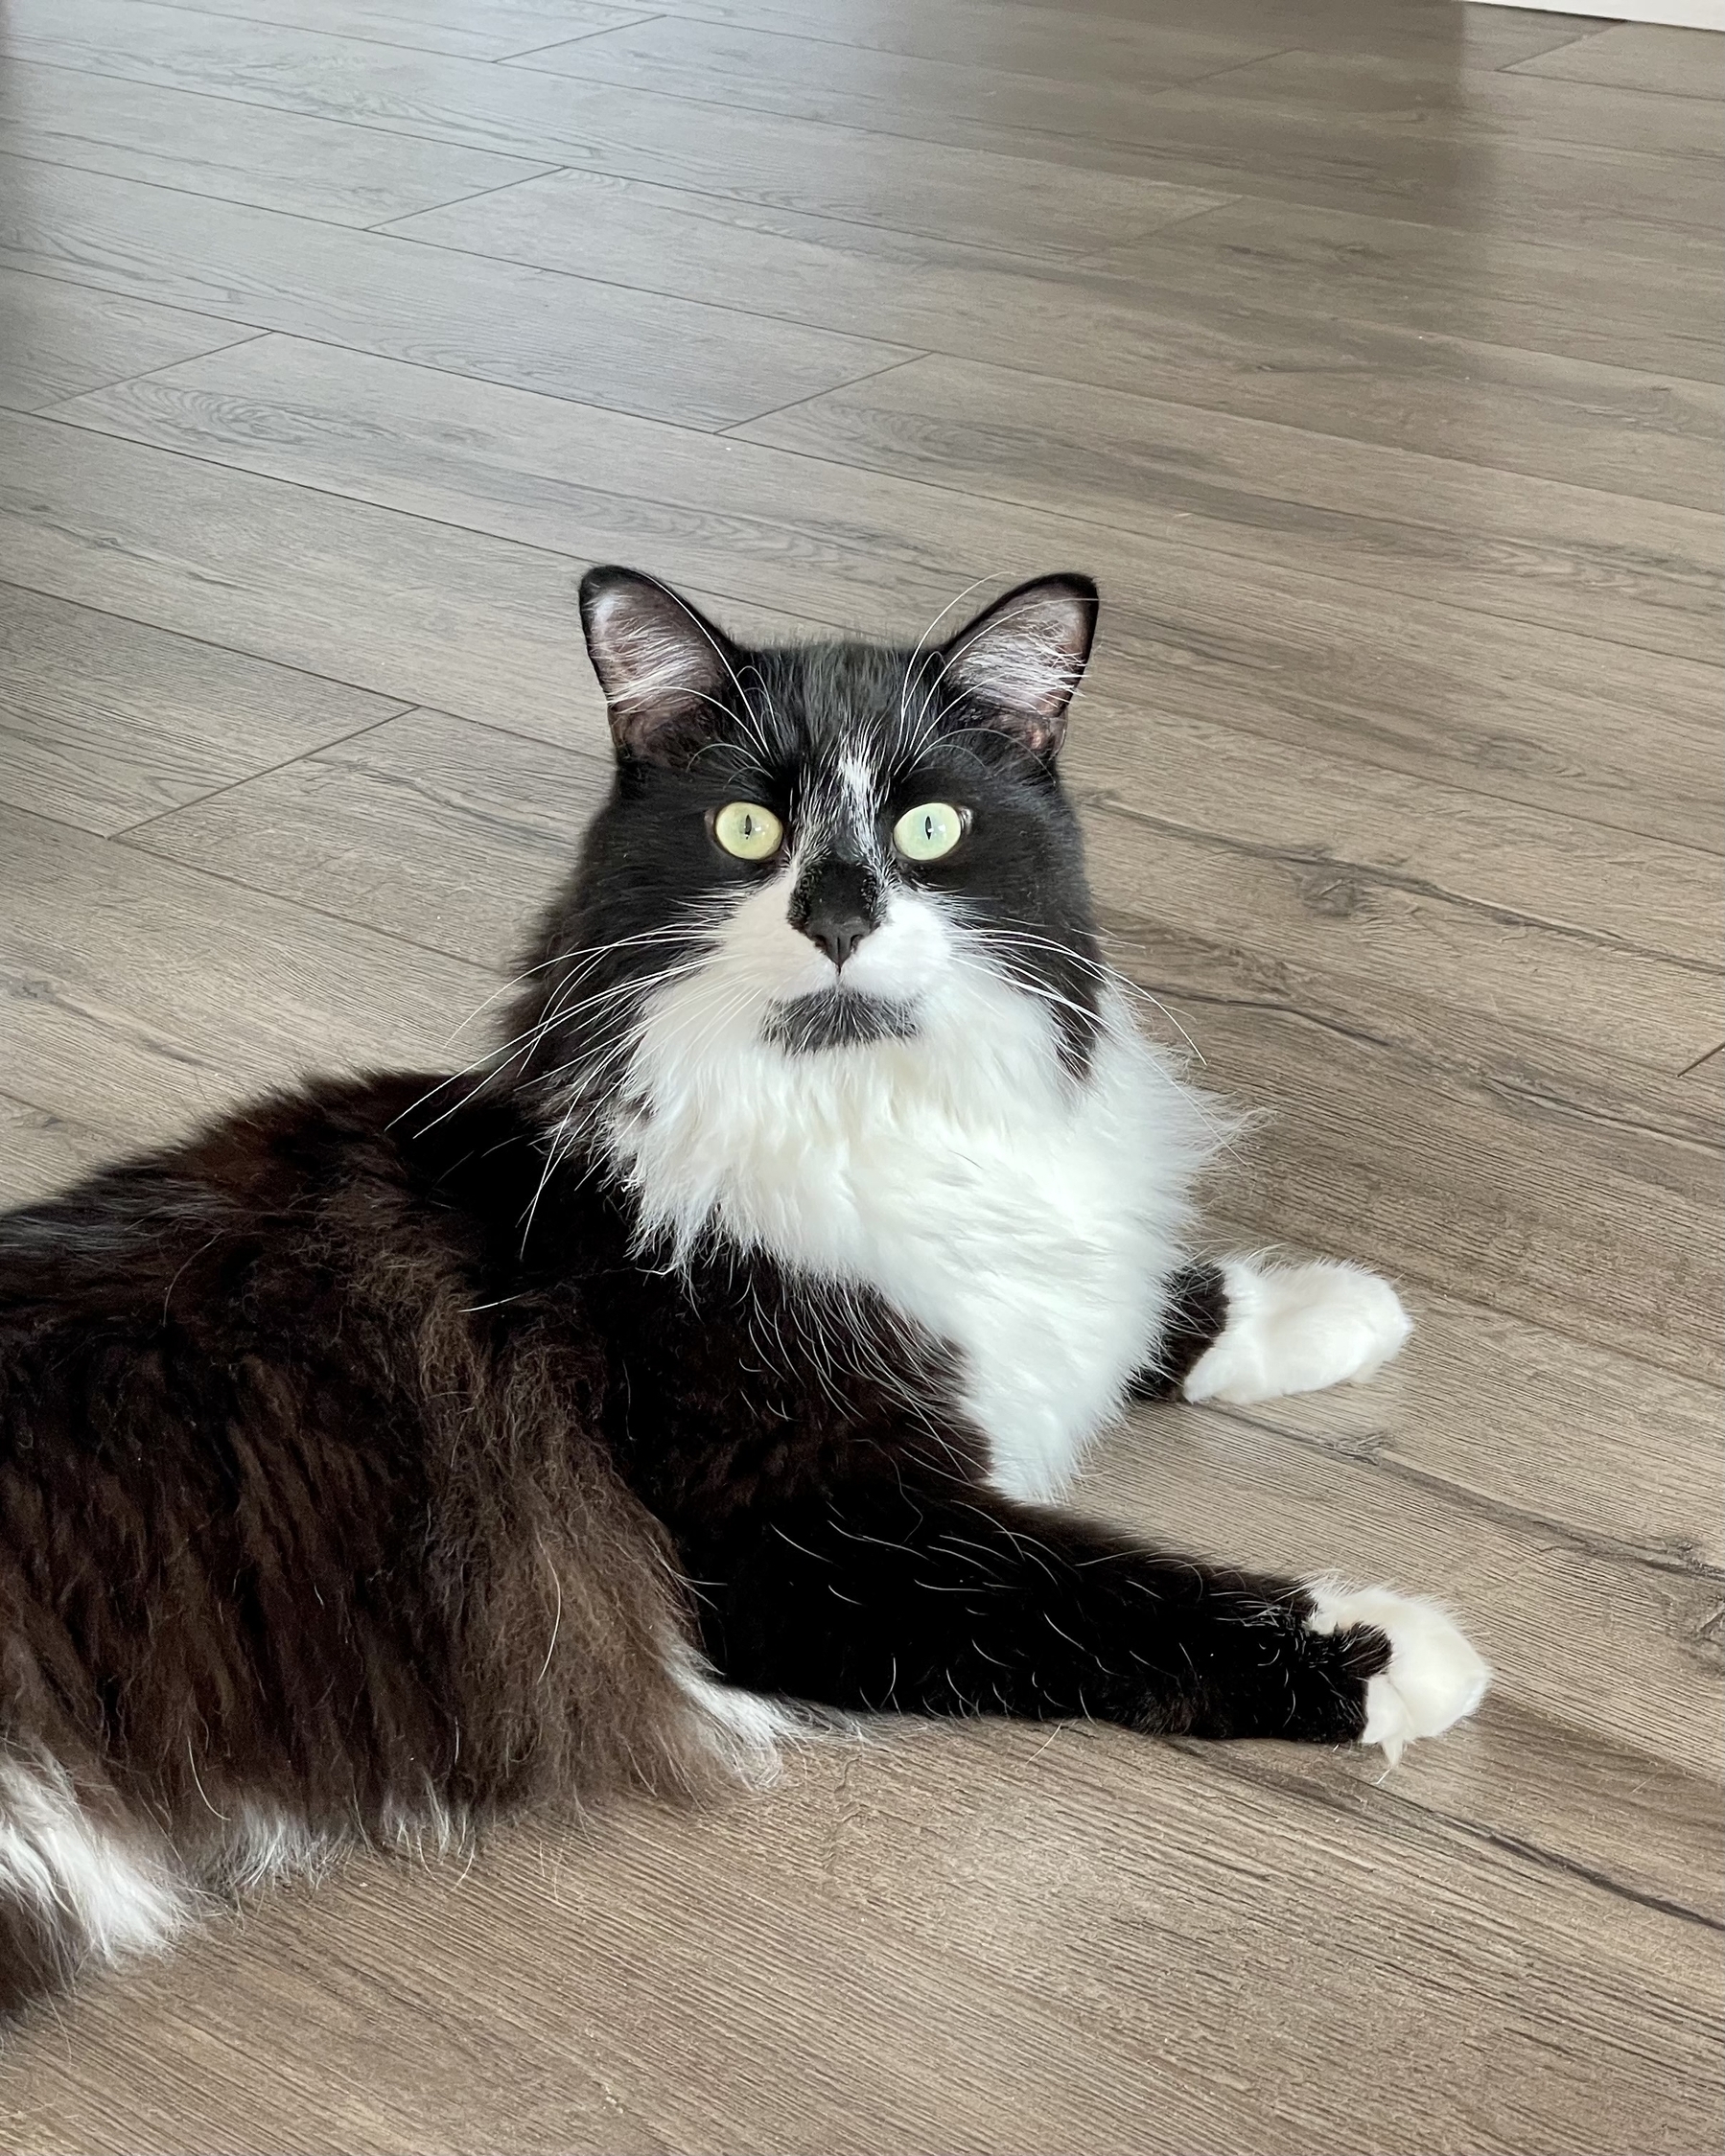 A black-and-white tuxedo cat is sprawled on the floor, his head upright with an alert expression on his face, looking directly into the camera.